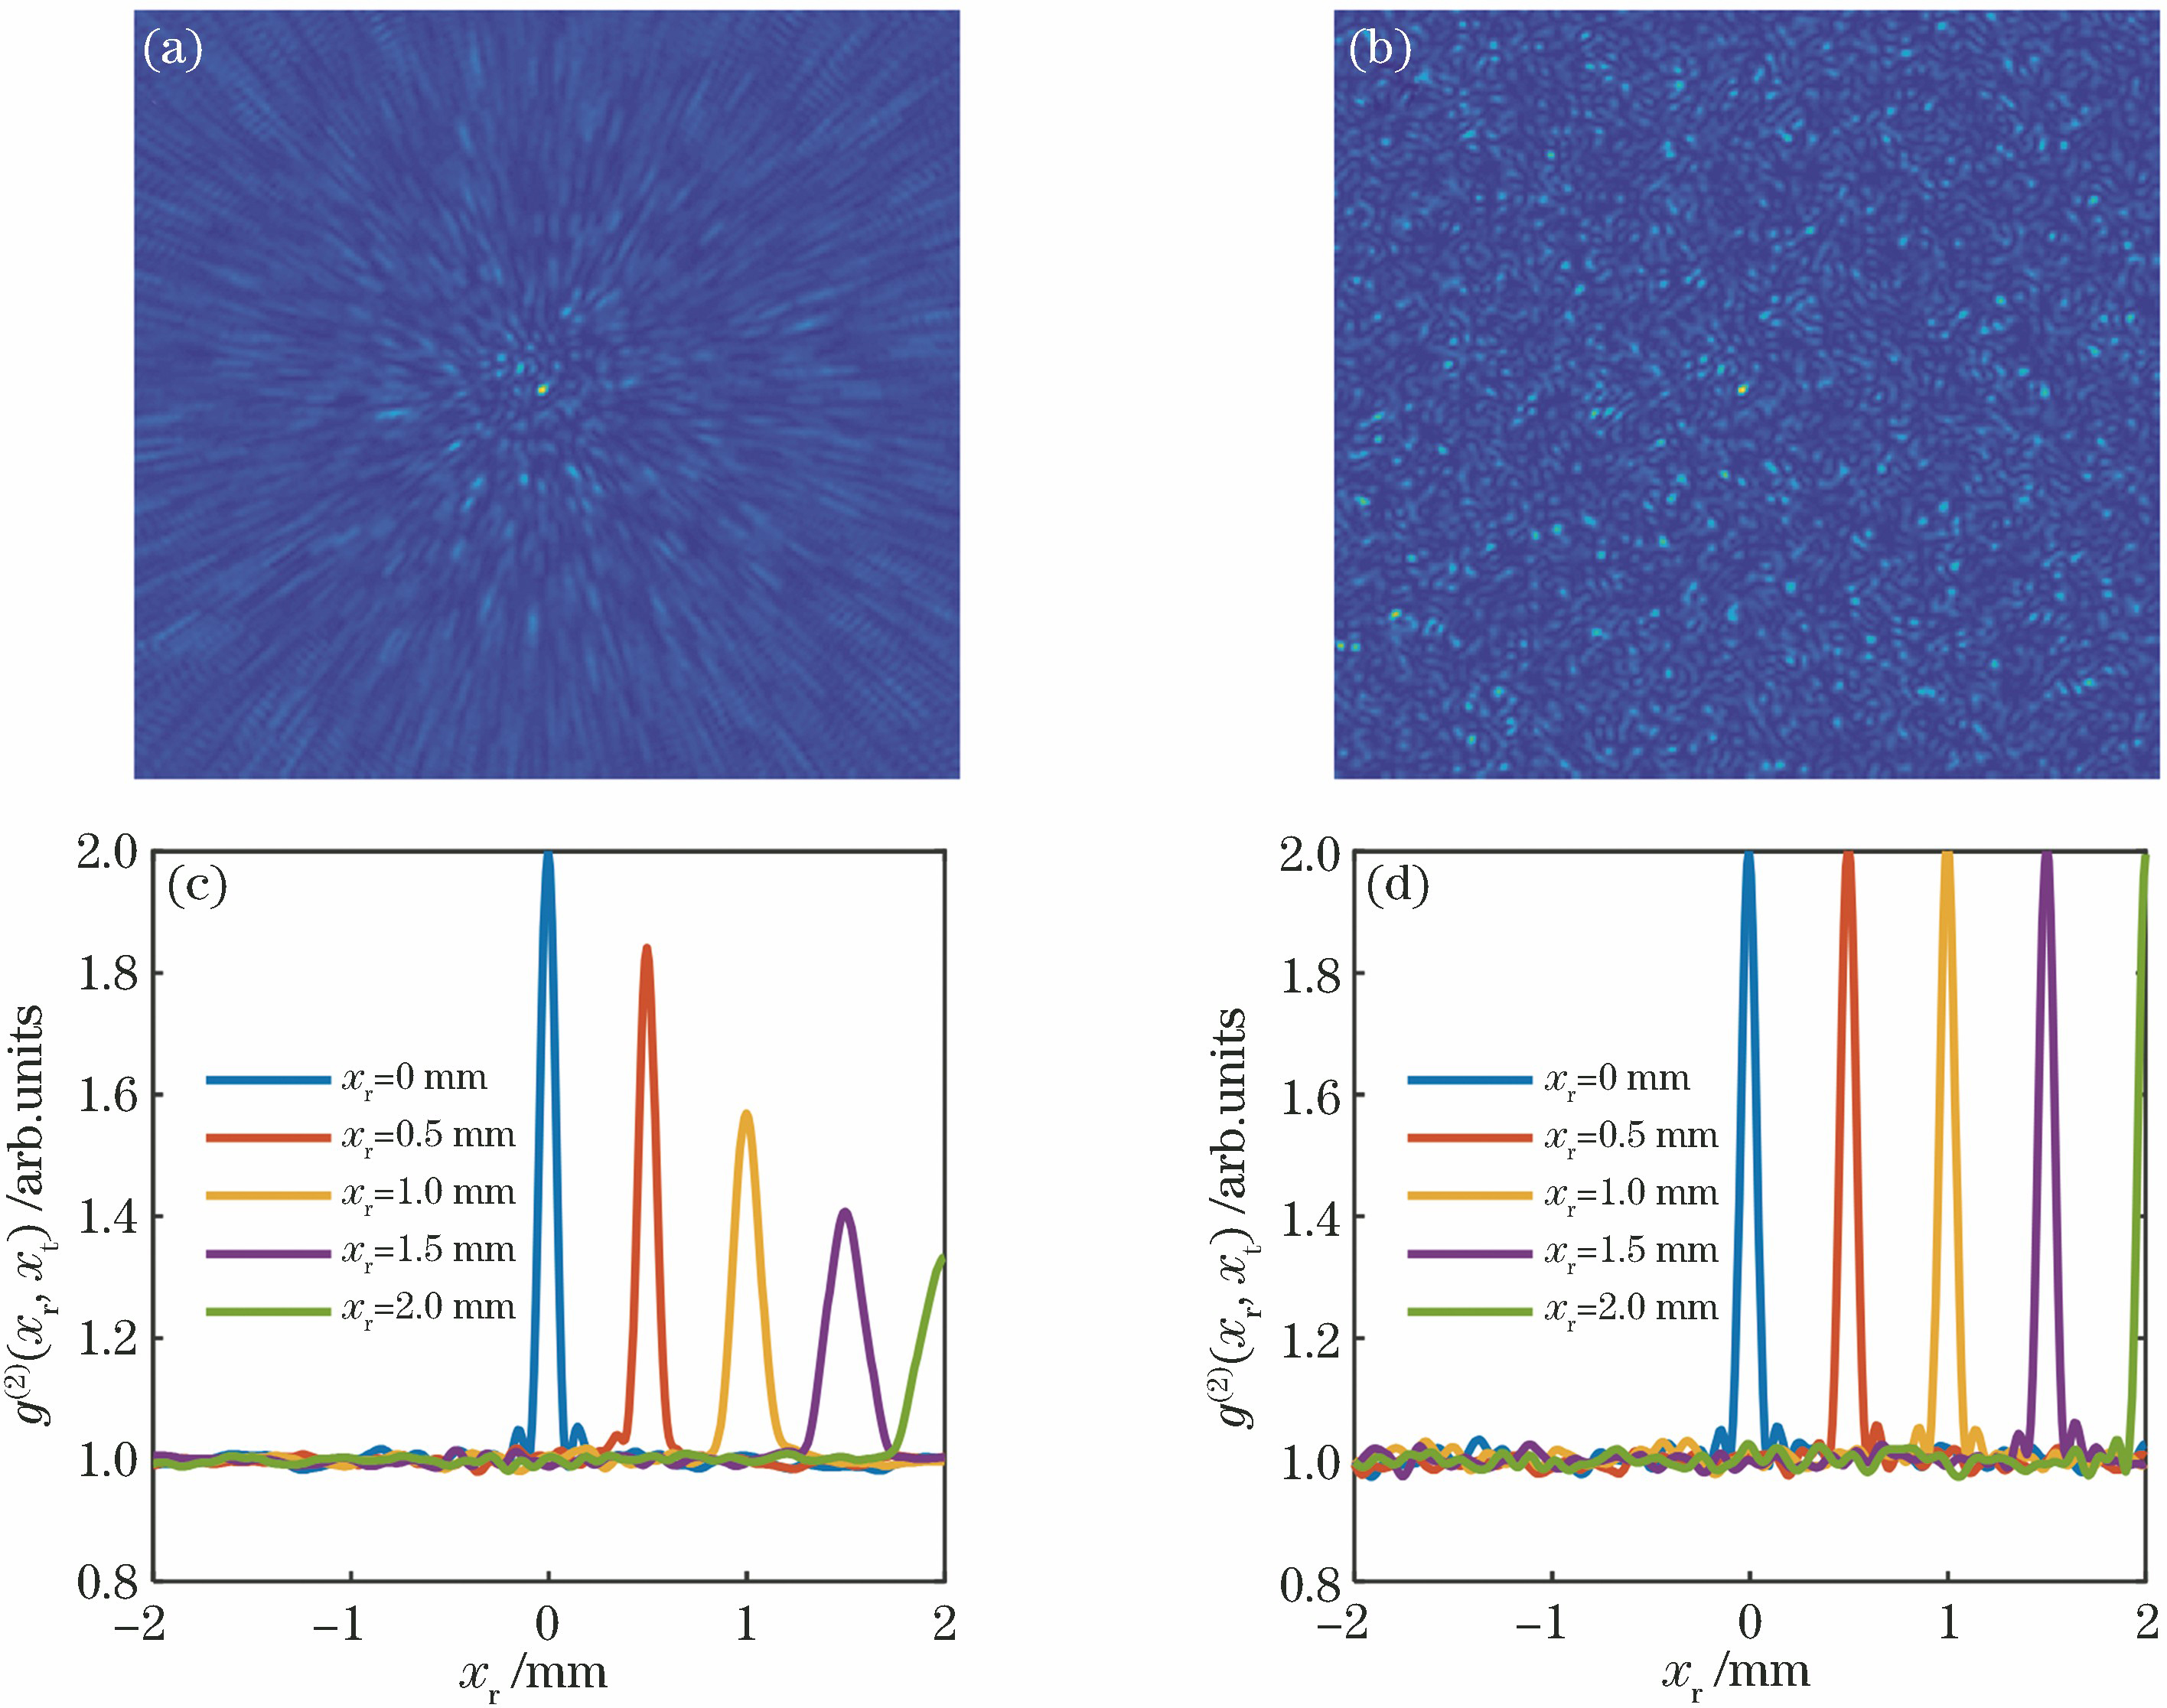 Simulation of X-ray speckle field. (a) Monochromatic speckle field; (b) polychromatic speckle field; (c) normalized second-order correlation function of monochromatic speckle field; (d) normalized second-order correlation function of polychromatic speckle field